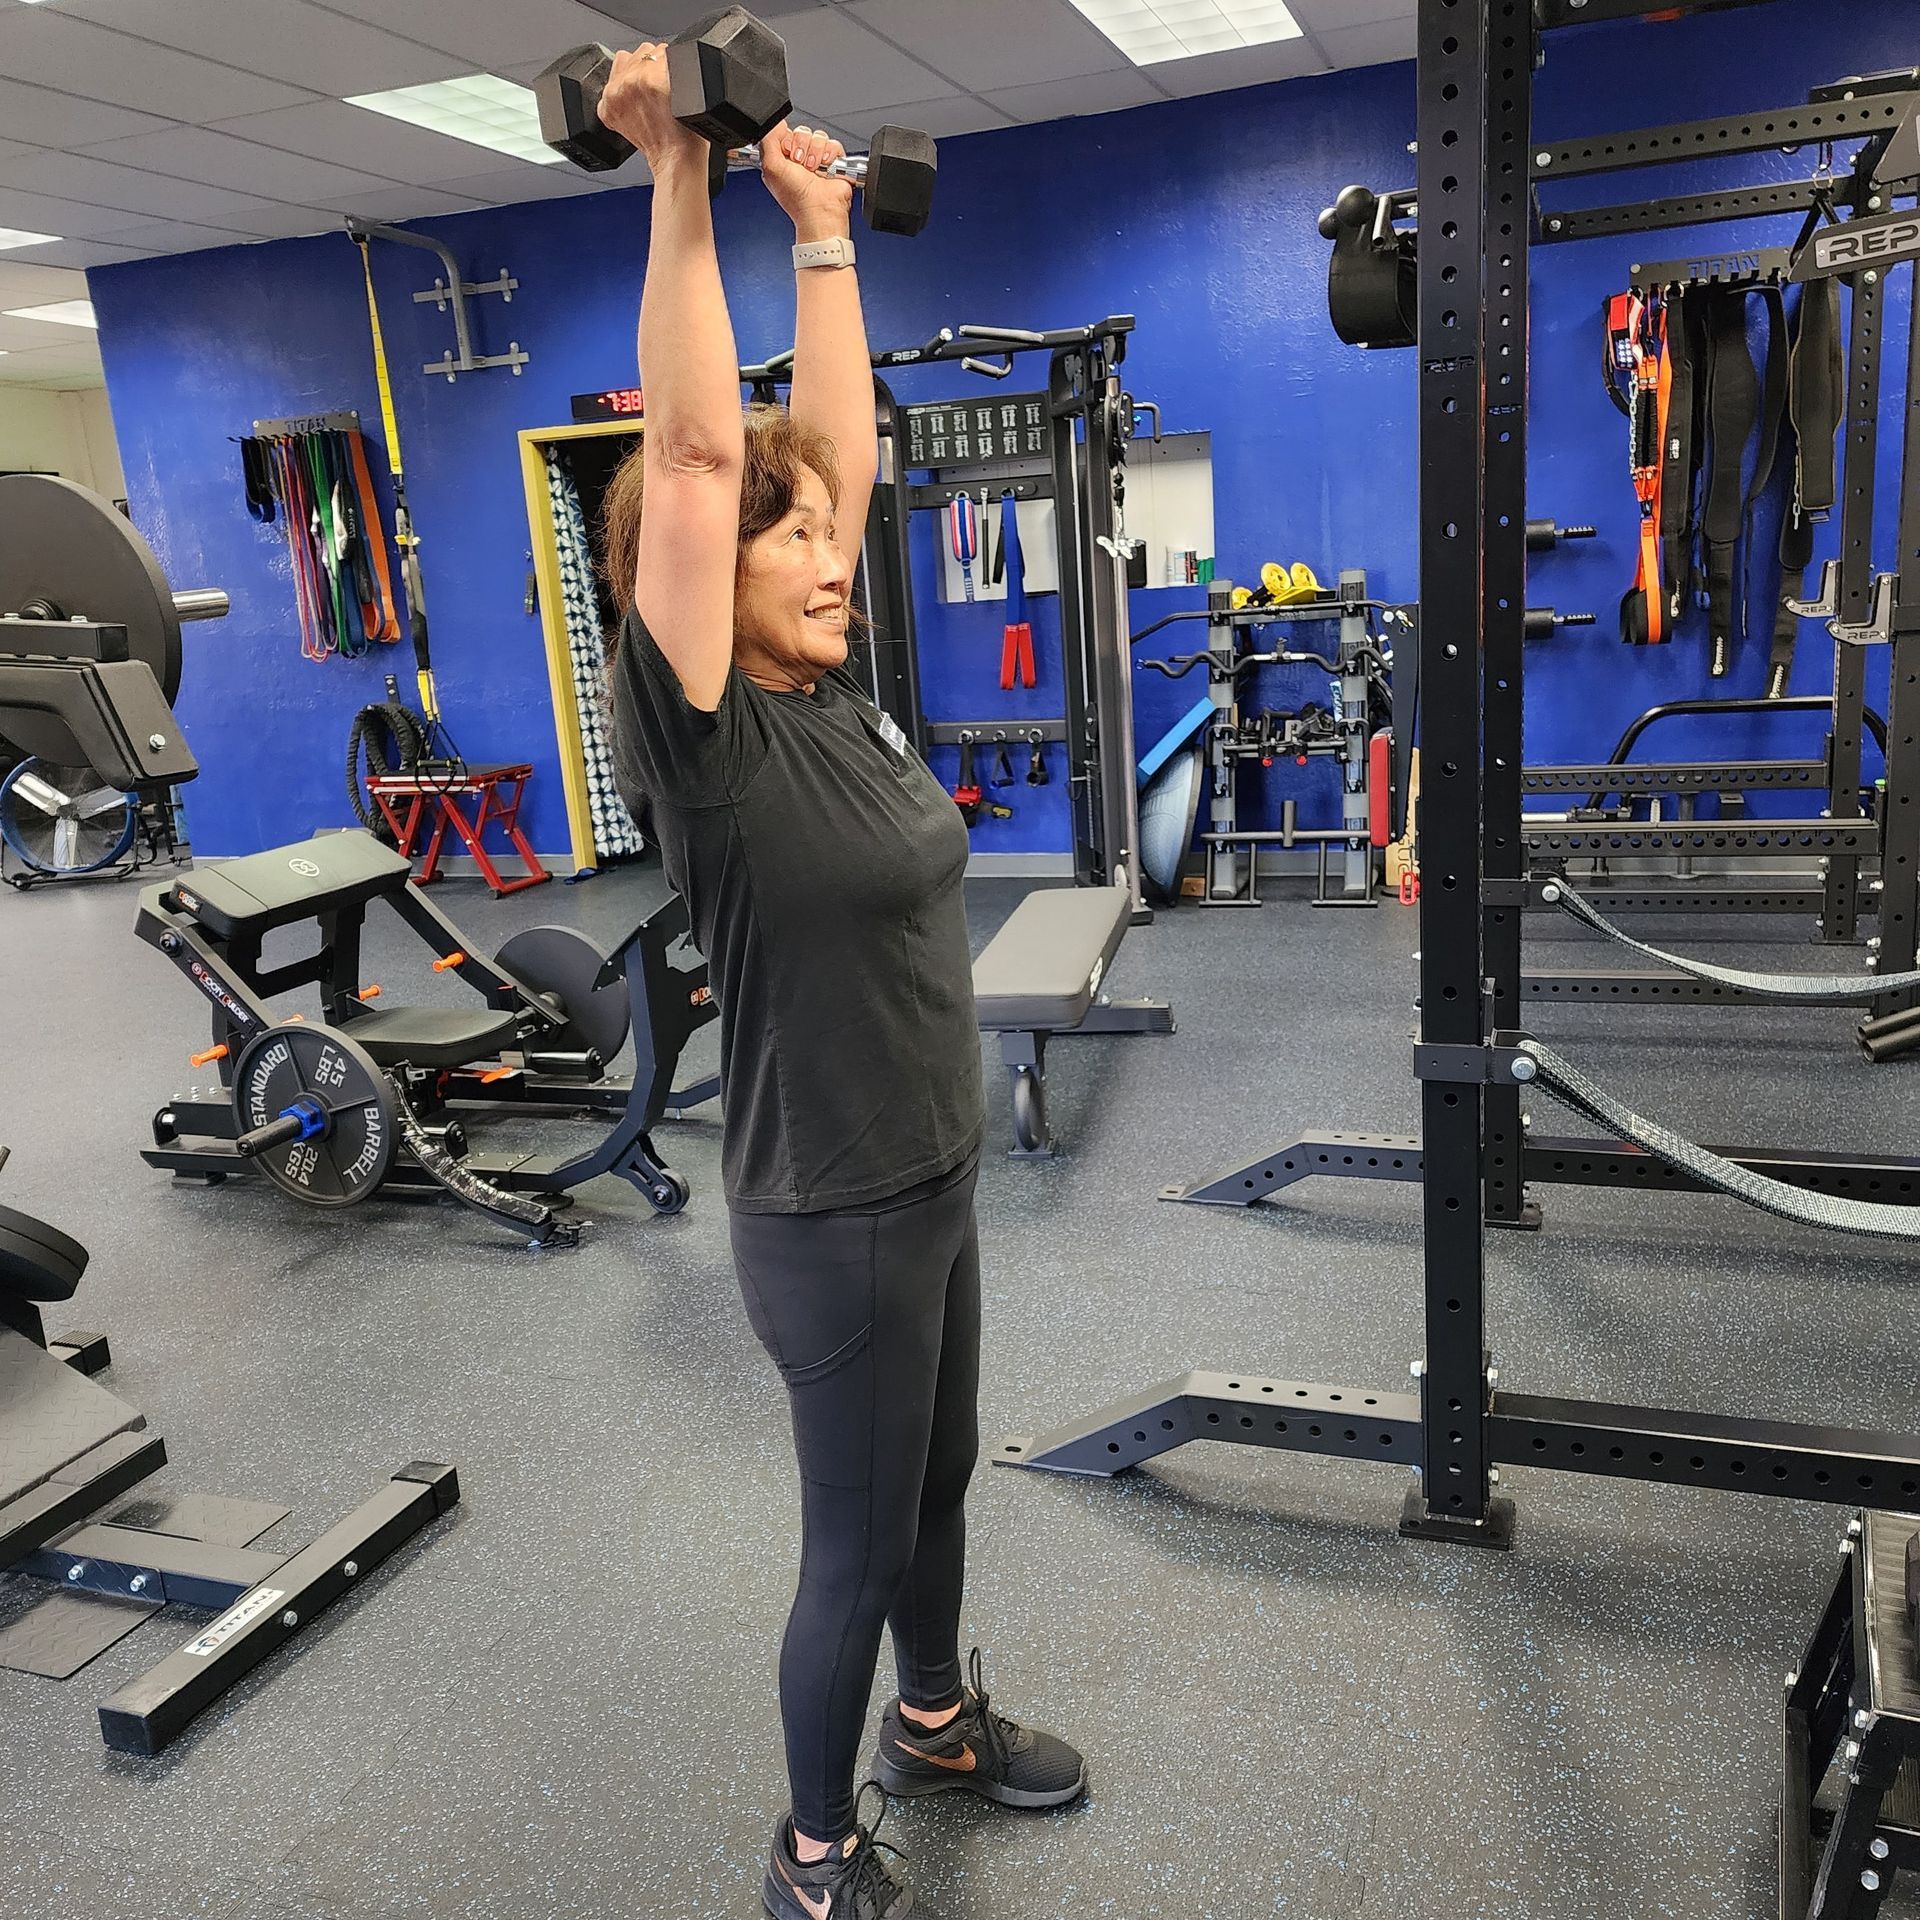 Older lady with a smile on her face wearing gym clothes lifting dumbbells overhead to improve strength and overall well-being in a well-equipped and clean gym.